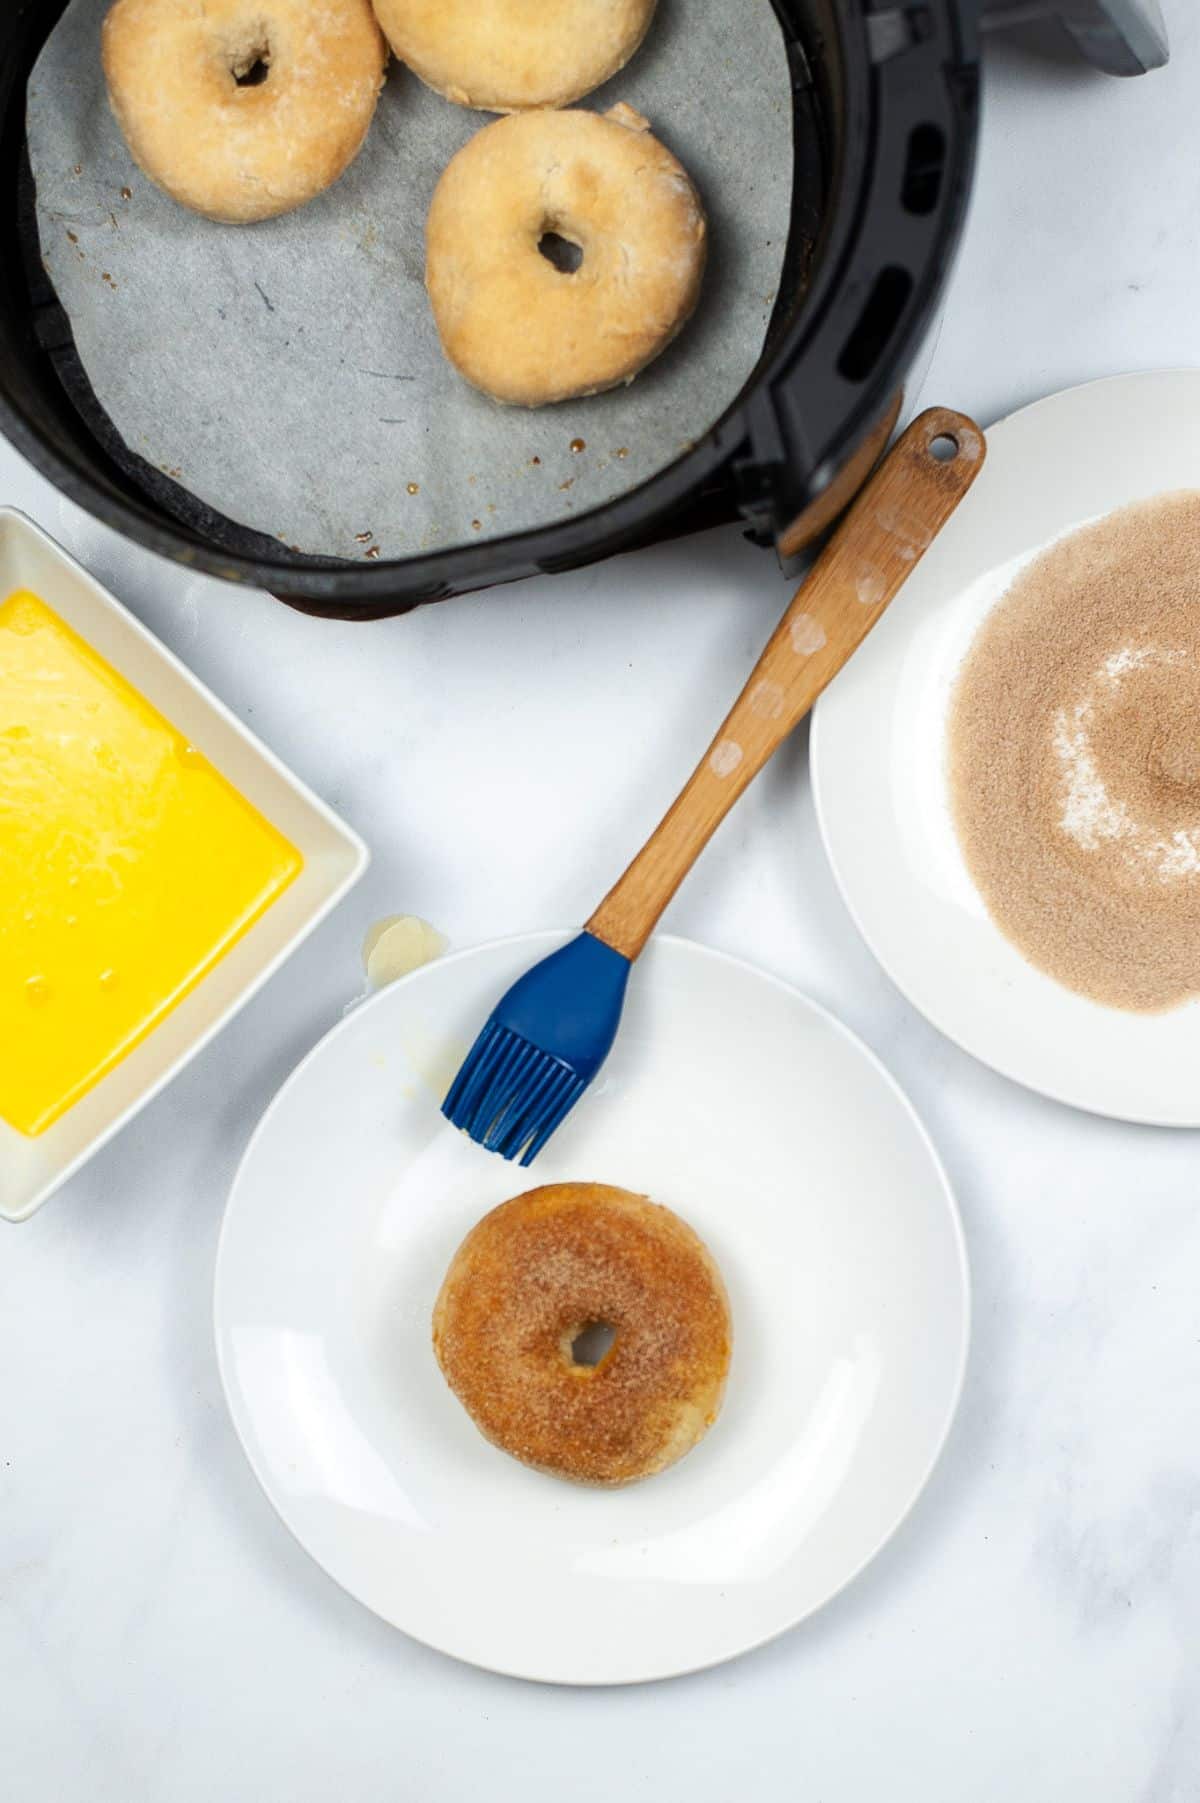 a coated donut on a white plate next to a blue pastry brush, next to a bowl of melted butter, plate of cinnamon sugar and donuts in an air fryer